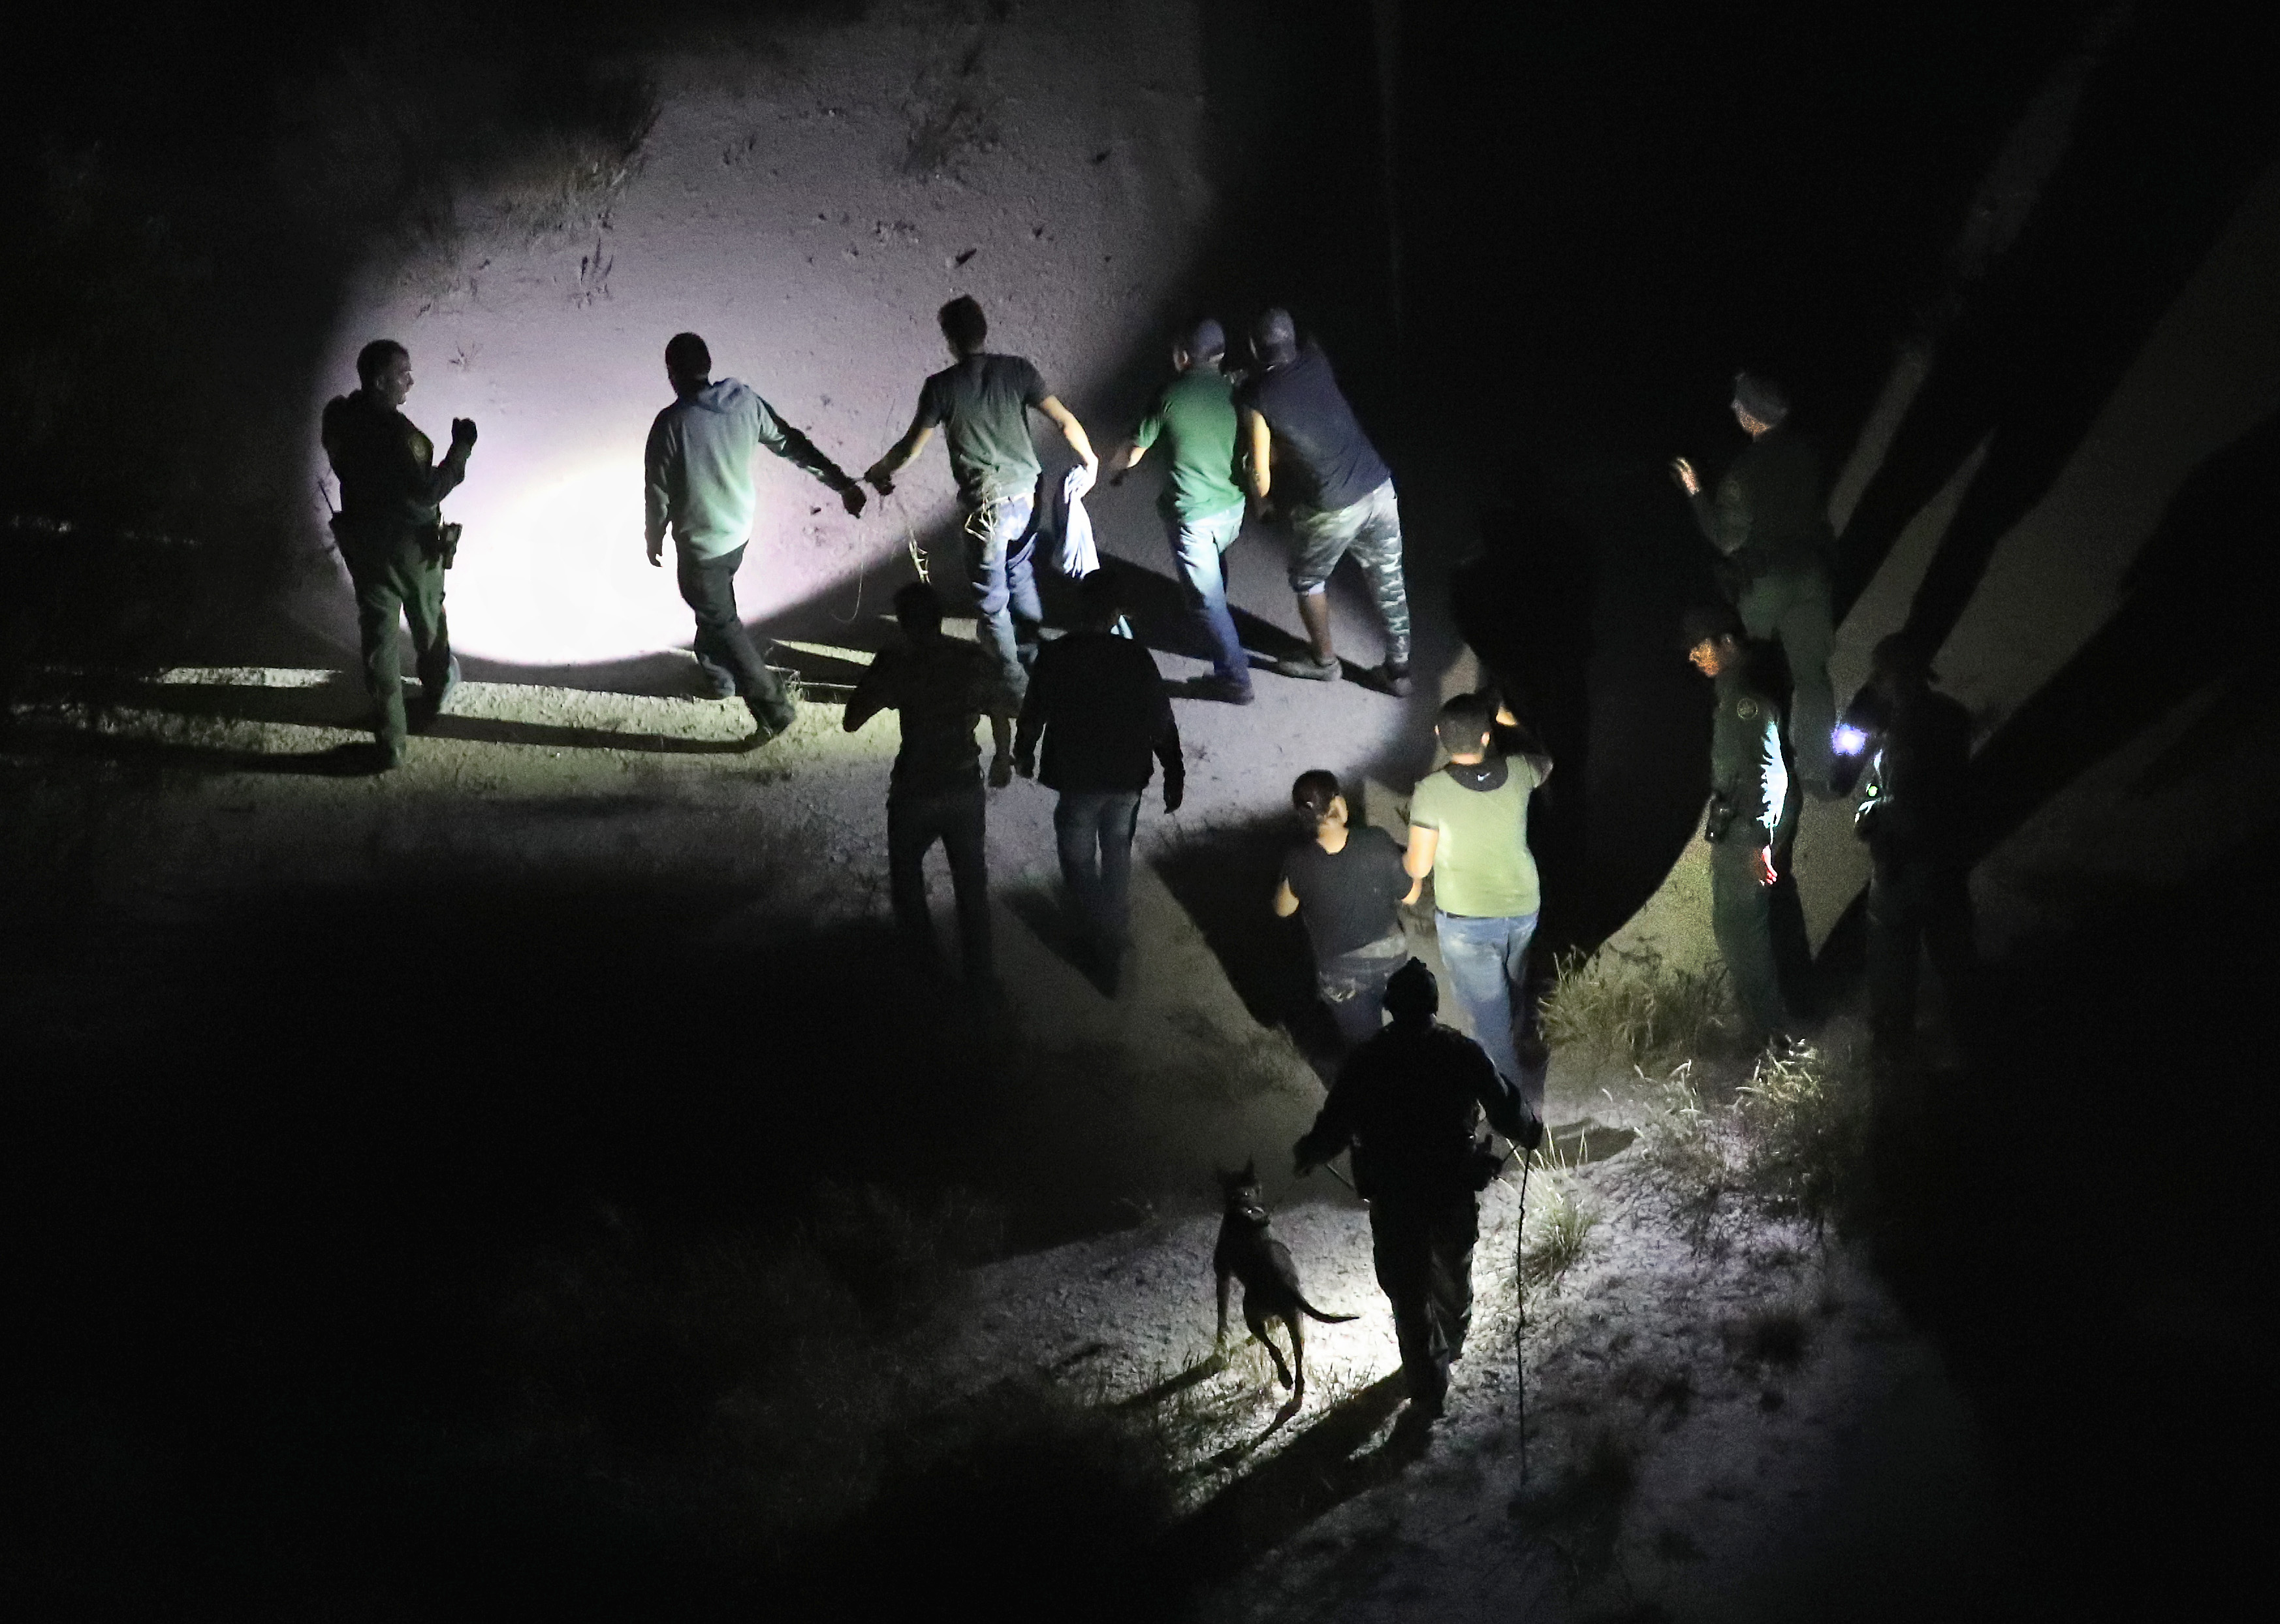 U.S. Border Patrol agents with a K-9 unit detain undocumented immigrants after they illegally crossed the U.S.-Mexico border on Oct. 18, 2016, in McAllen, Texas.